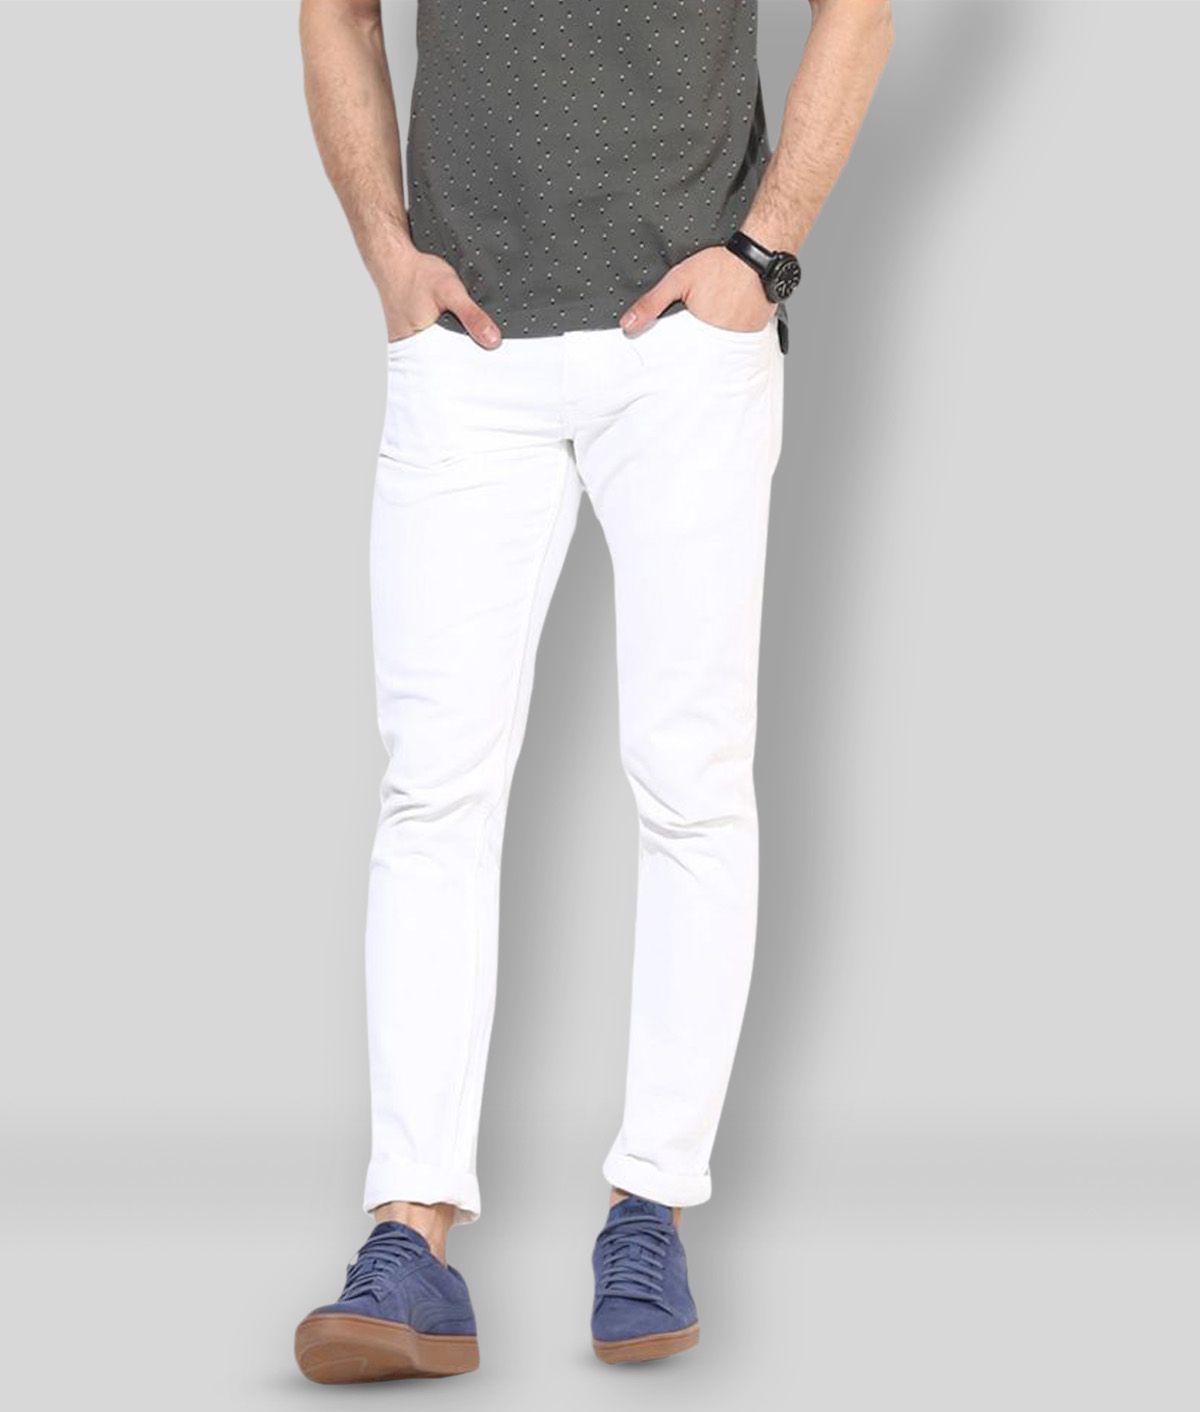     			X20 Jeans - White Cotton Blend Slim Fit Men's Jeans ( Pack of 1 )